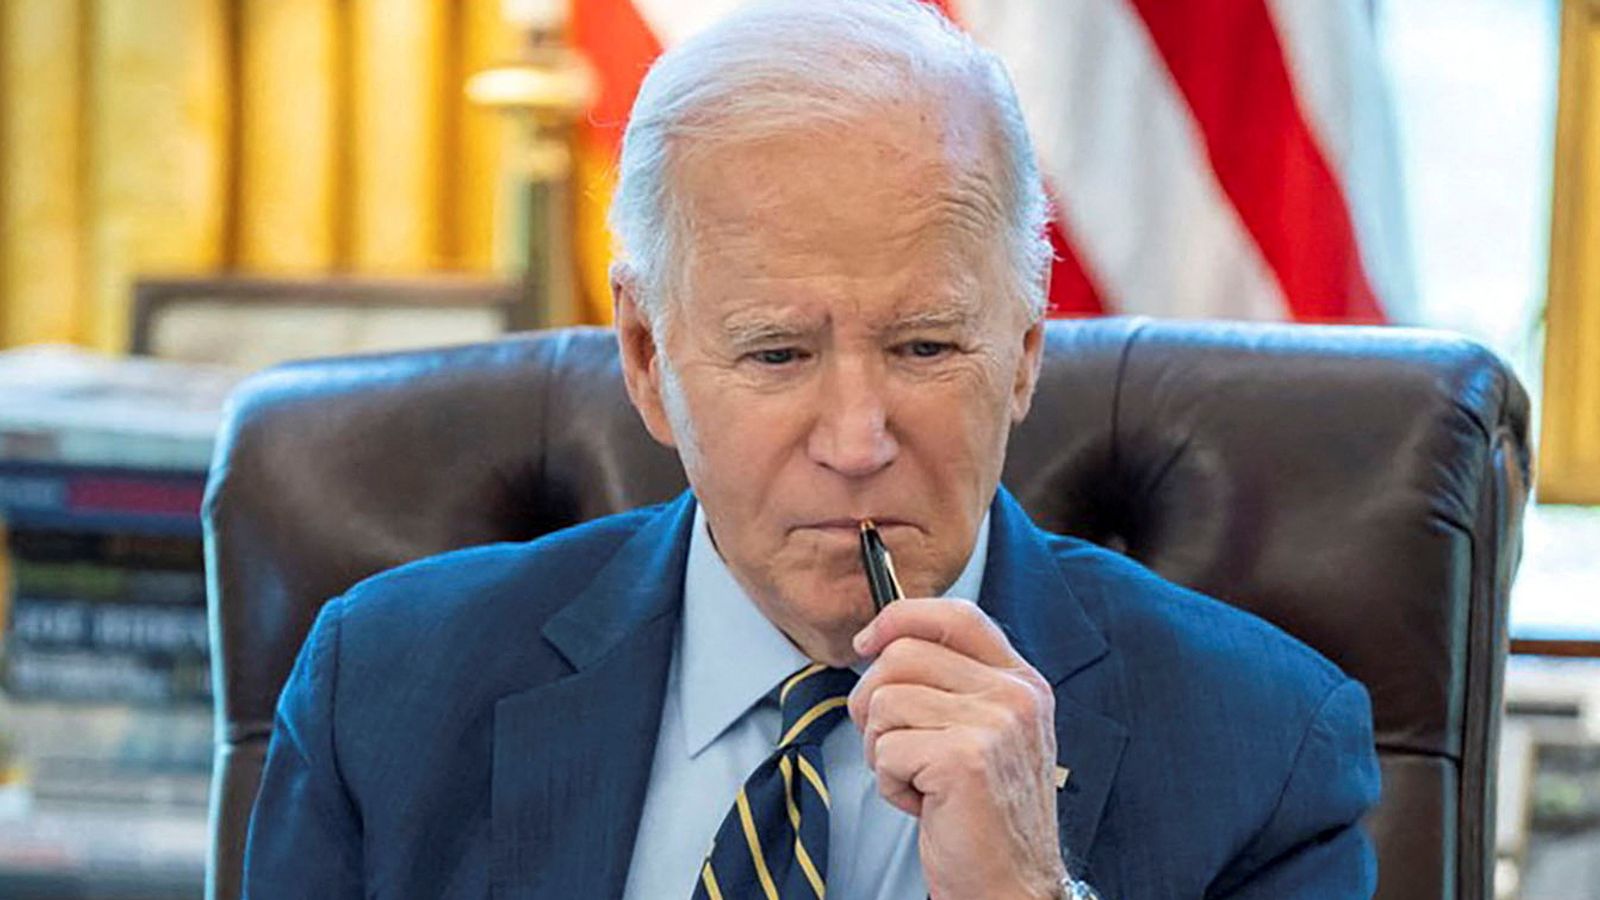 President Biden Watches Iran\'s Attack on Israel Unfold in Real Time